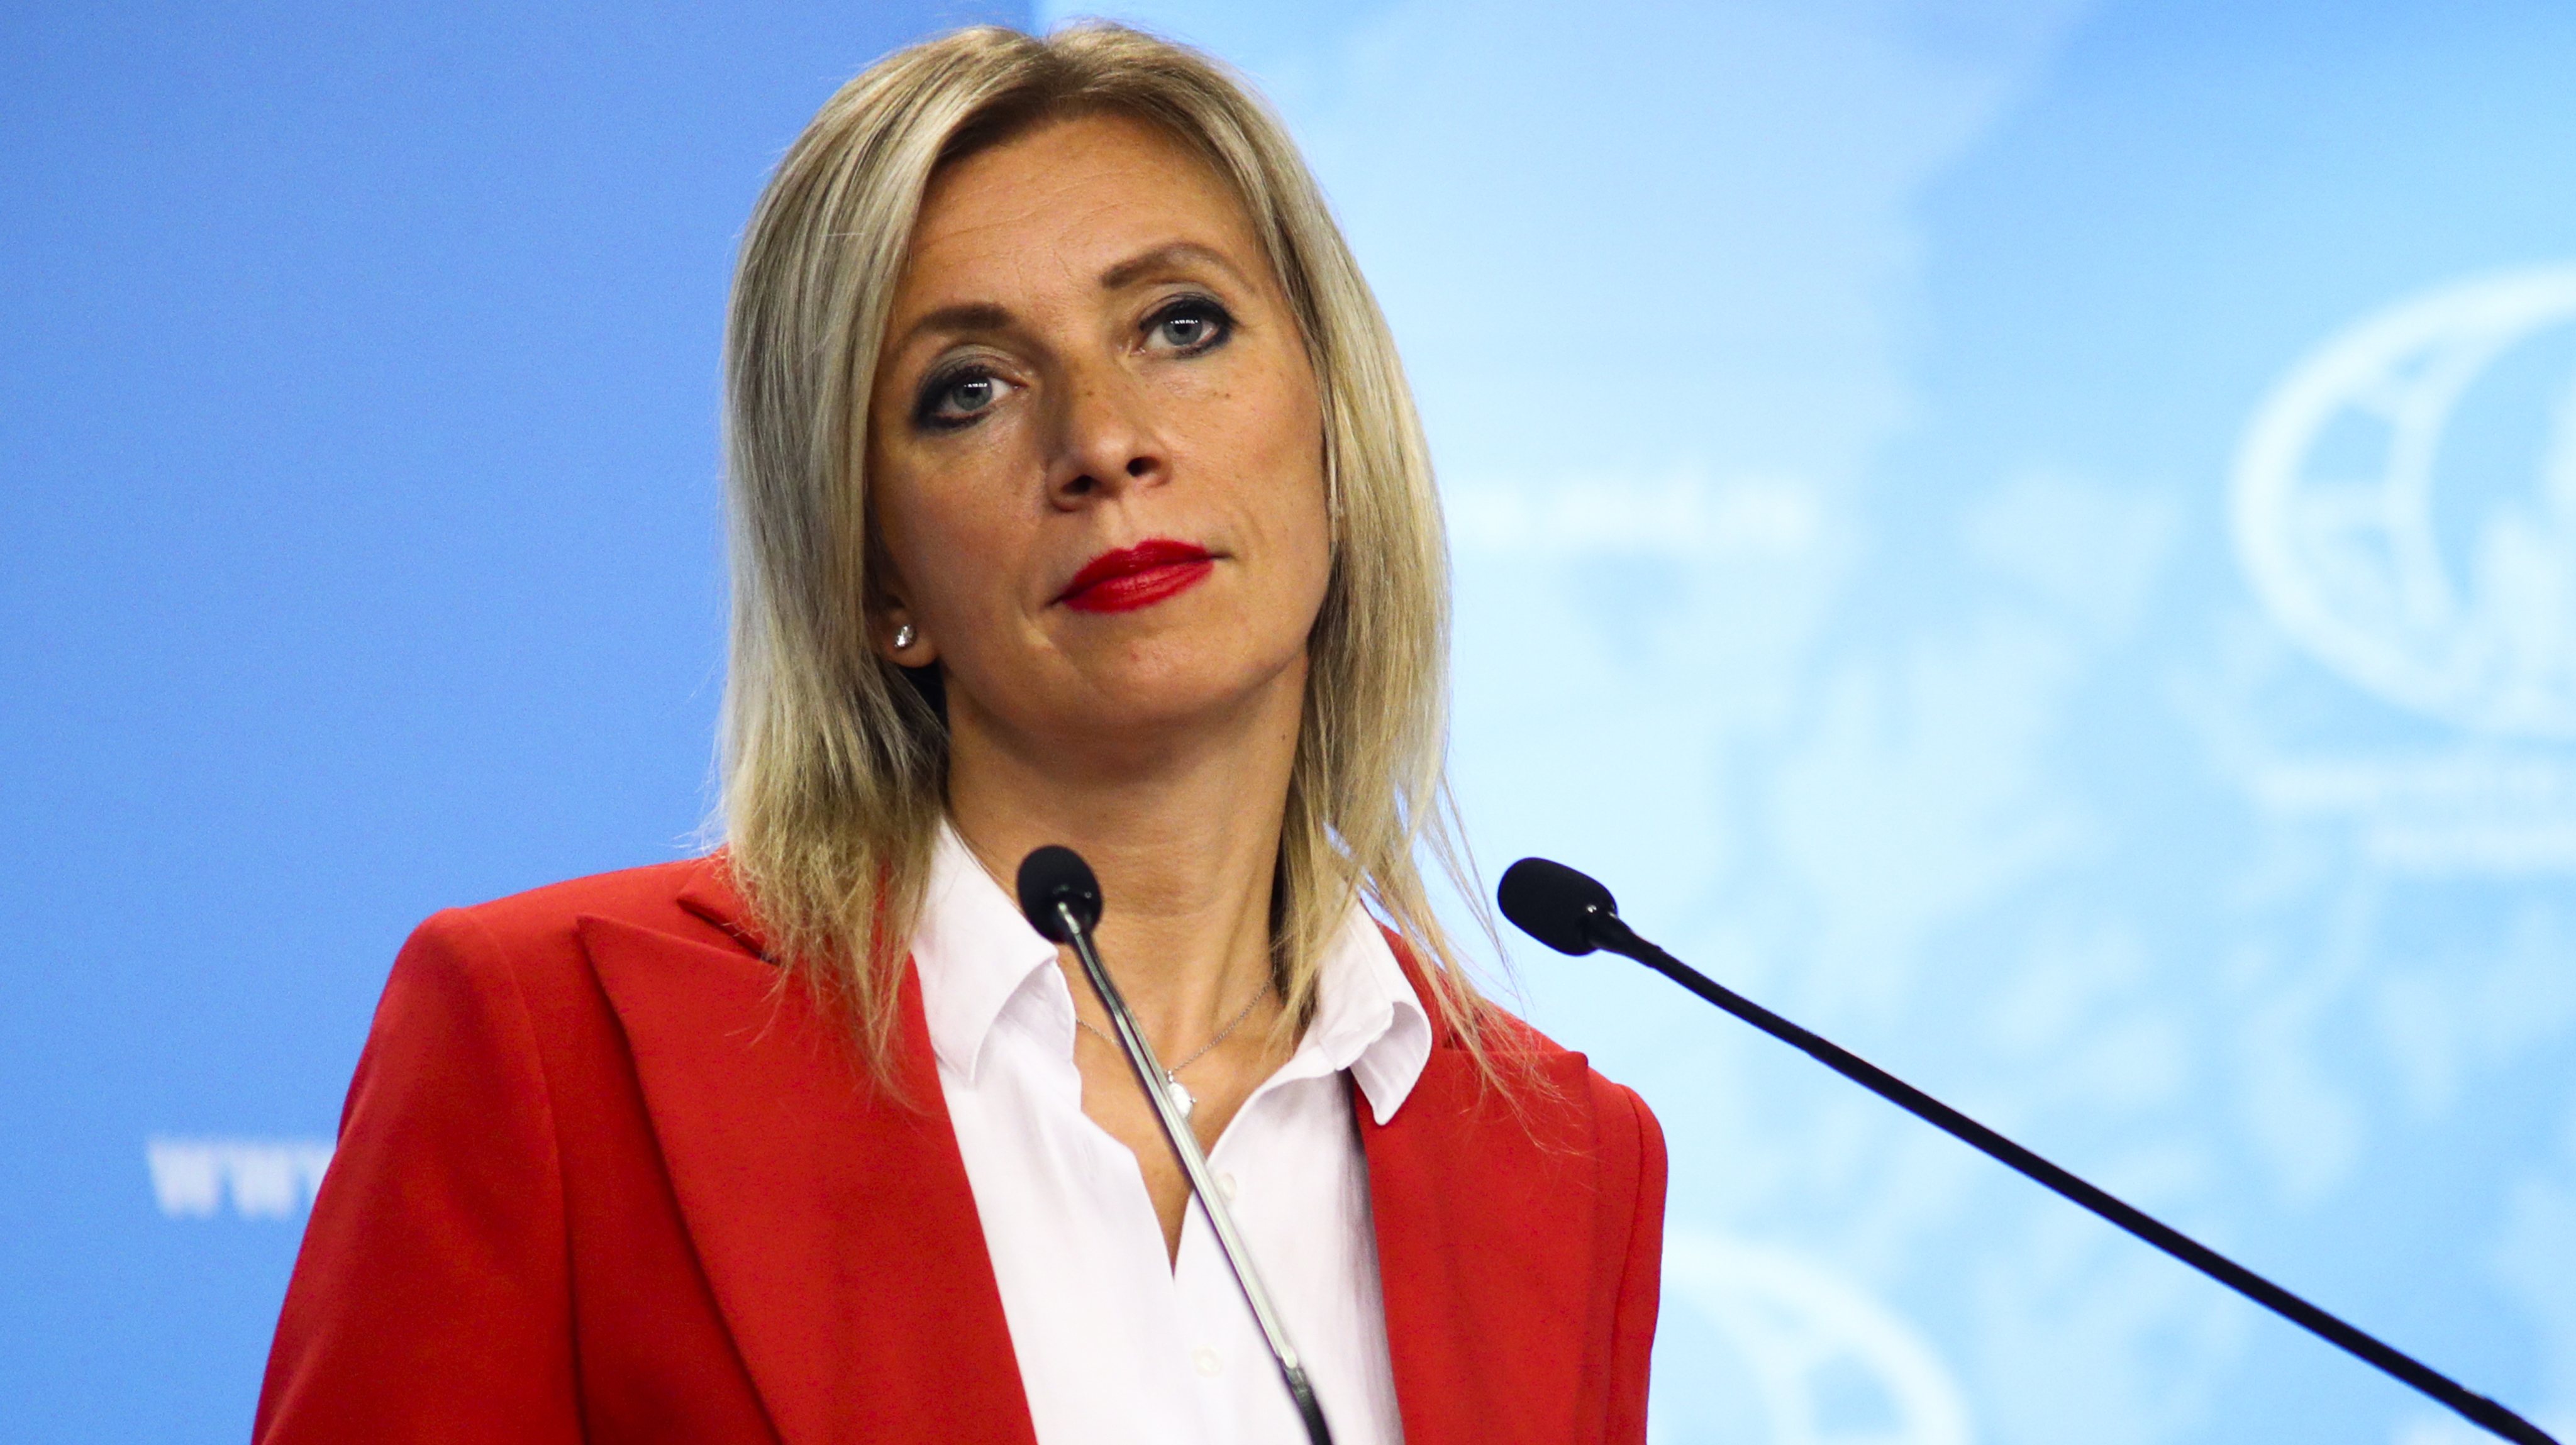 Russian Director of the Information and Press Department of the Ministry of Foreign Affairs, Maria Zakharova